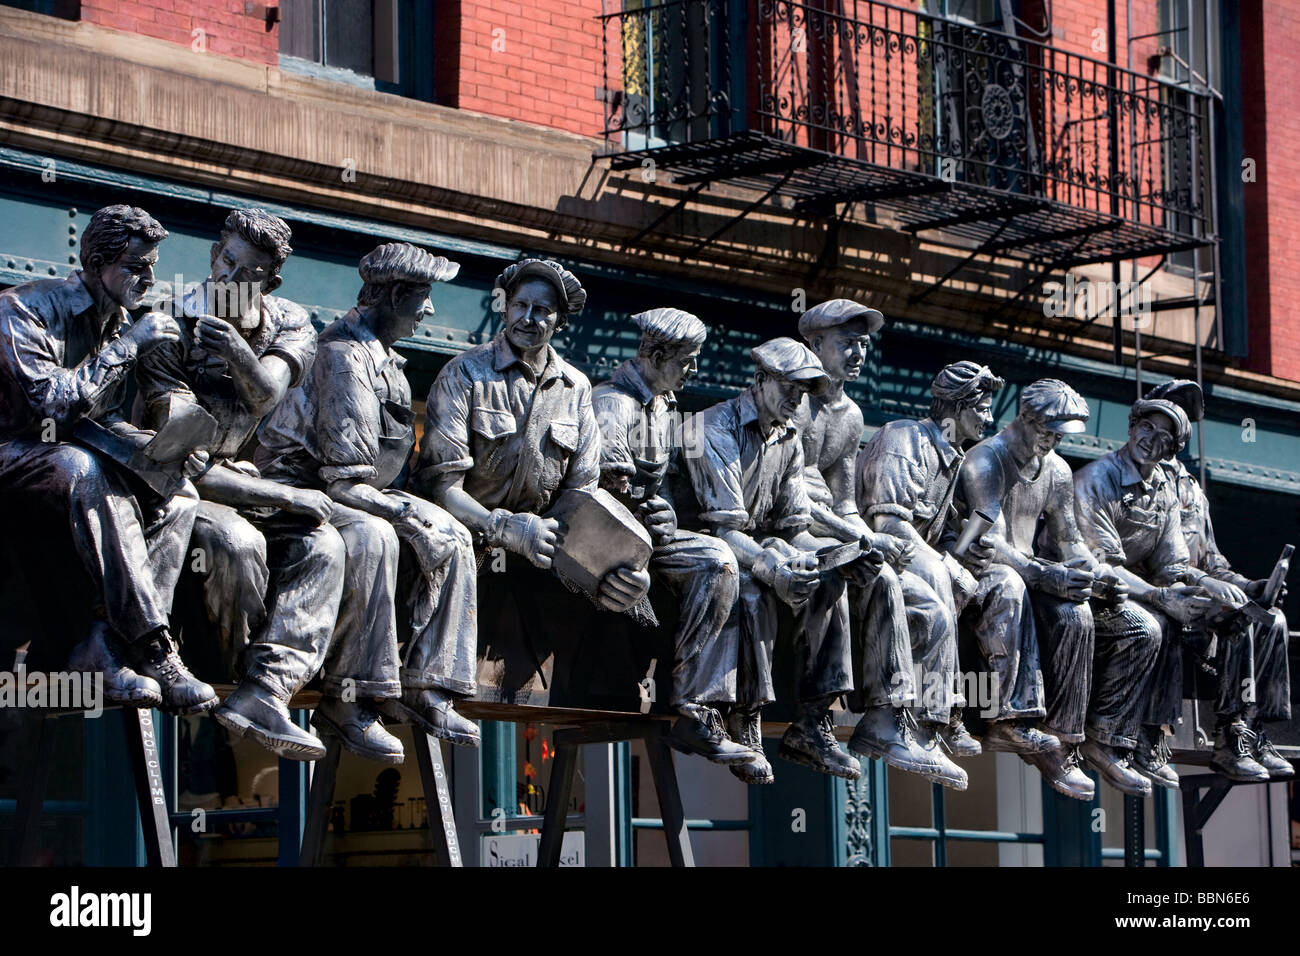 Iron workers sculpture by Sergio Furnari on the street in Manhattan, New York City, United States of America, North America. Stock Photo